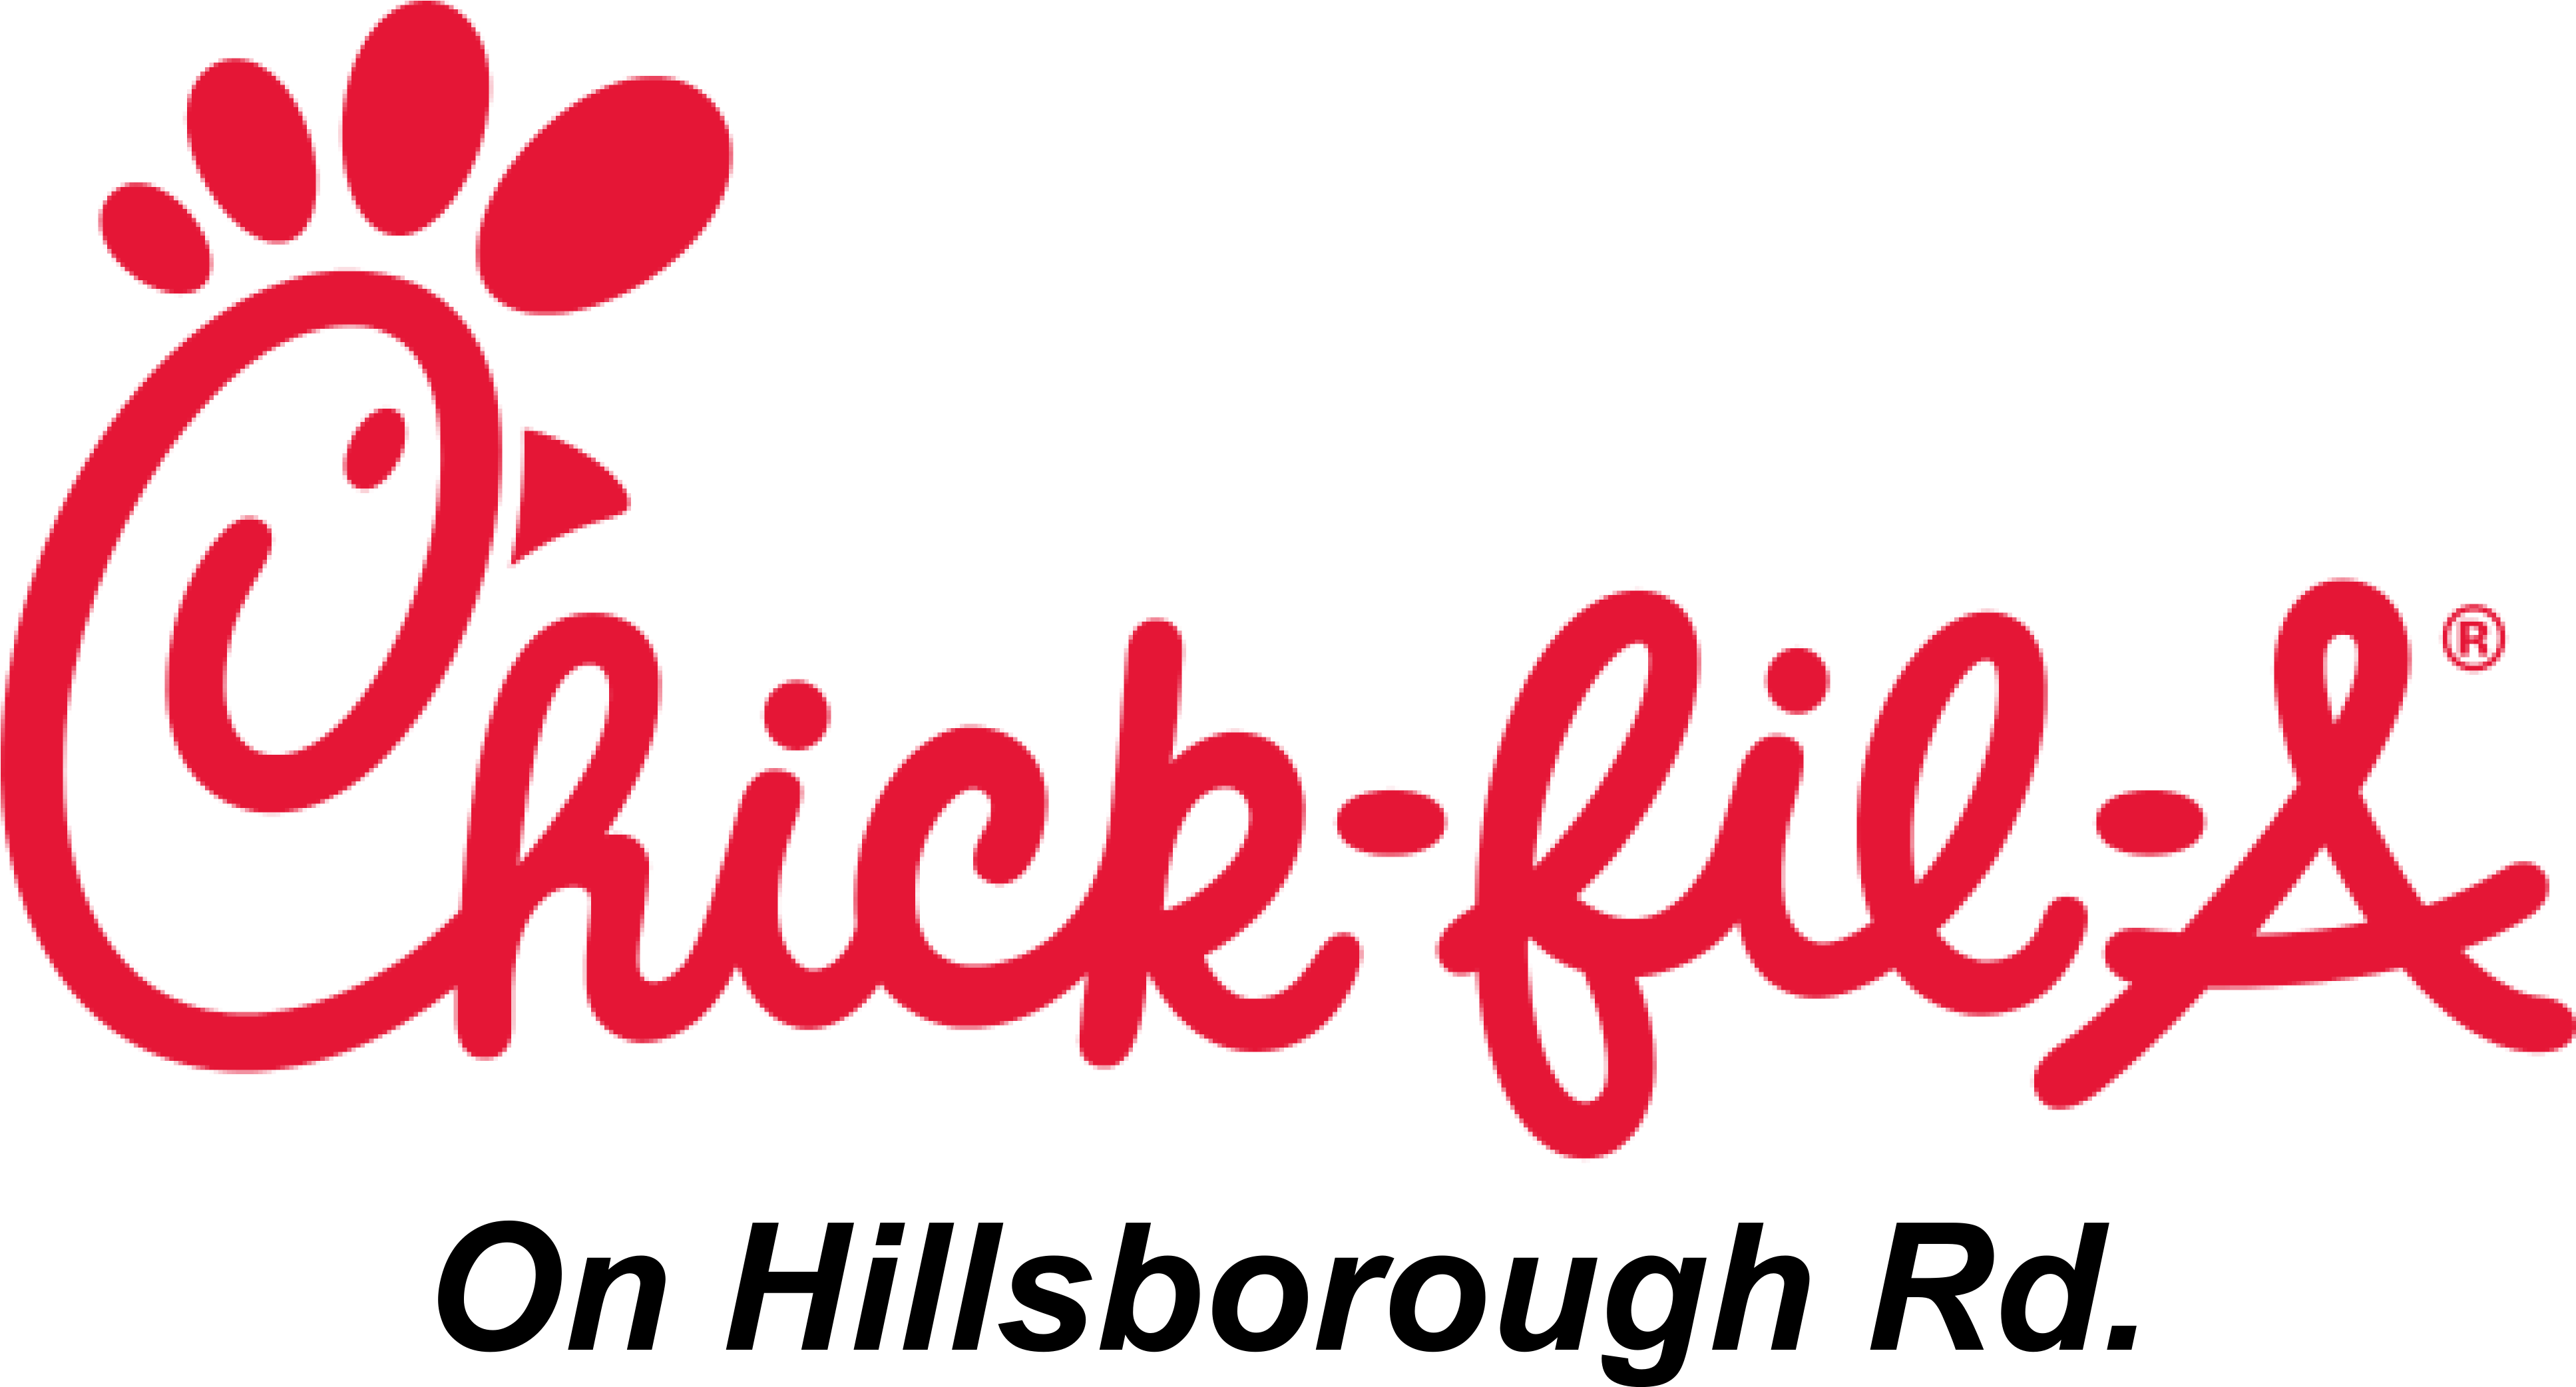 Photo Collection Of Chick Fil A Logo Image Wallpapers - Chick Fil A Logo Hd (3880x2090)